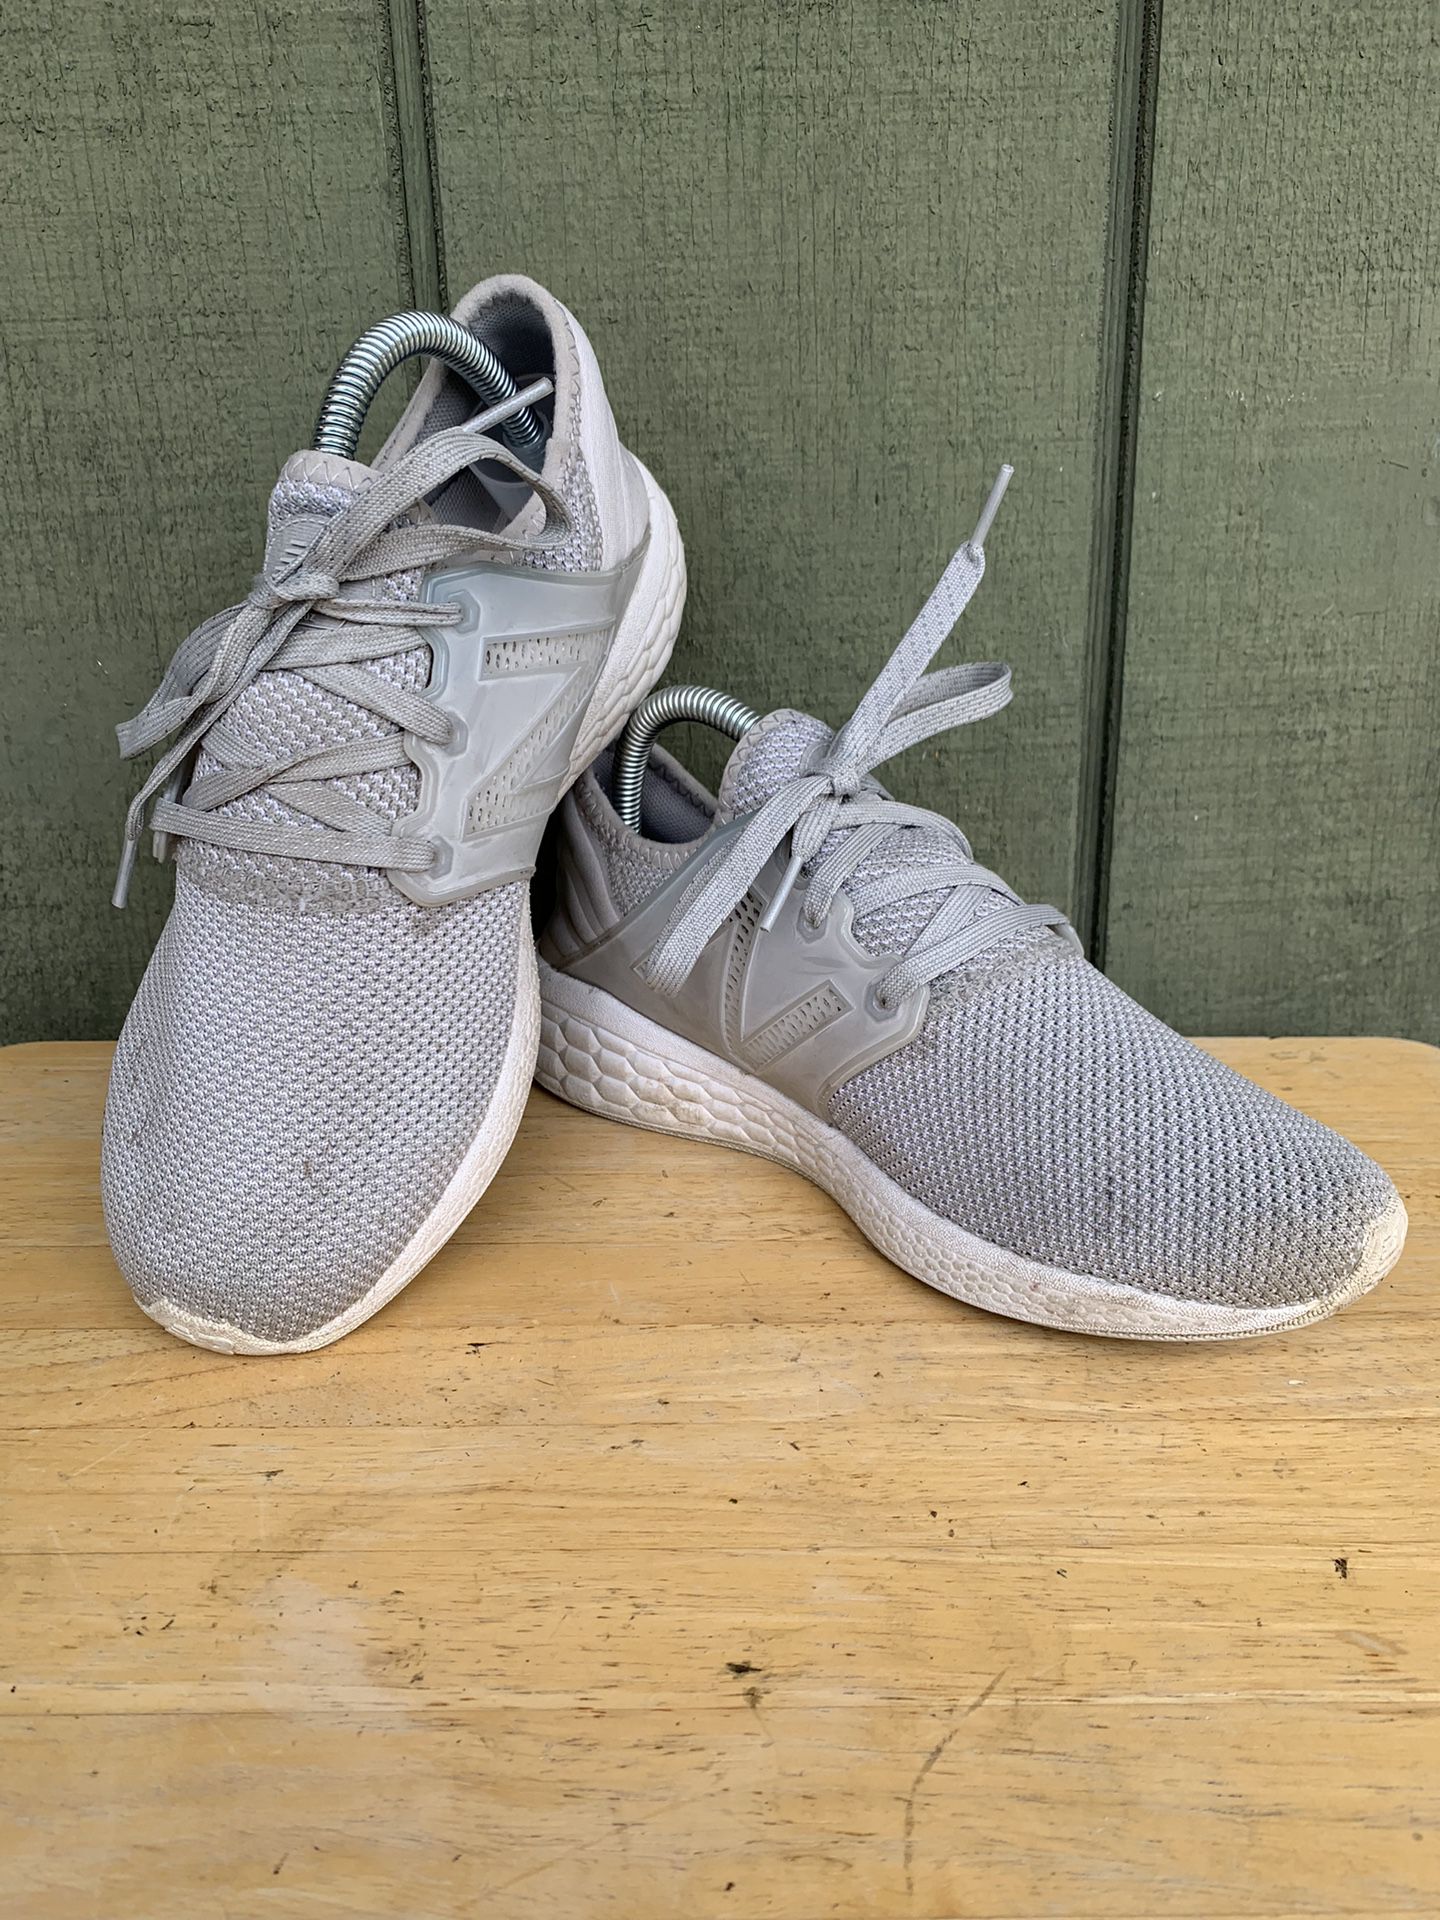 New Balance Womens Ff Cruz V2 Wcruzrg2 Gray Running Shoes Sneakers Size 8 M  For Sale In West Covina, Ca - Offerup